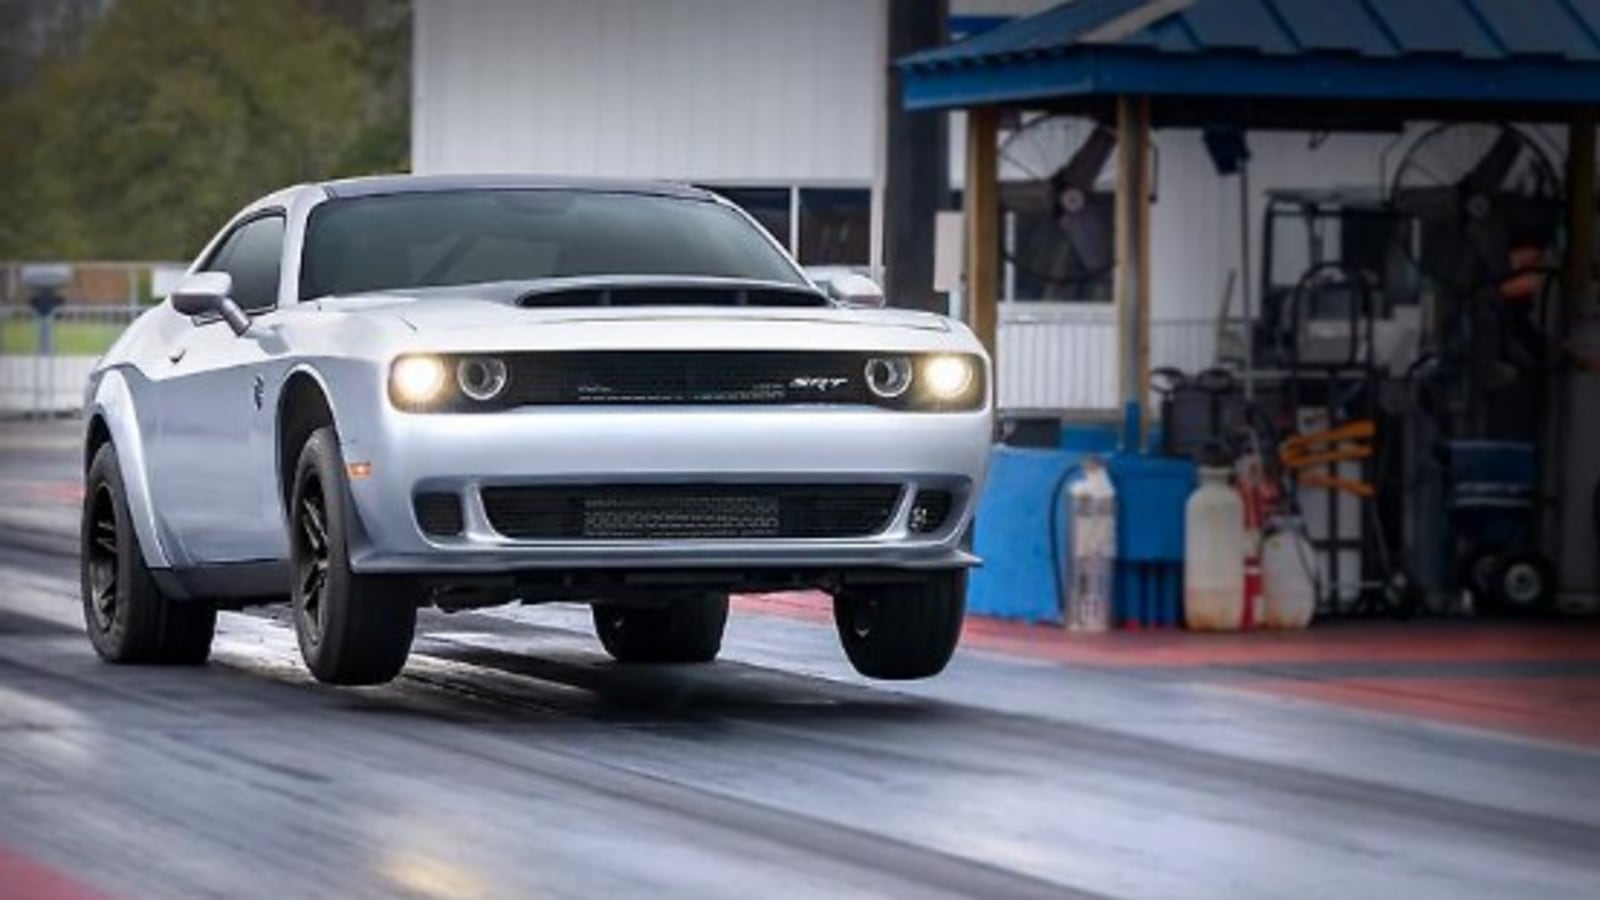 Dodge ends an era with last Challenger that zips to 100kmph in 1.66 seconds